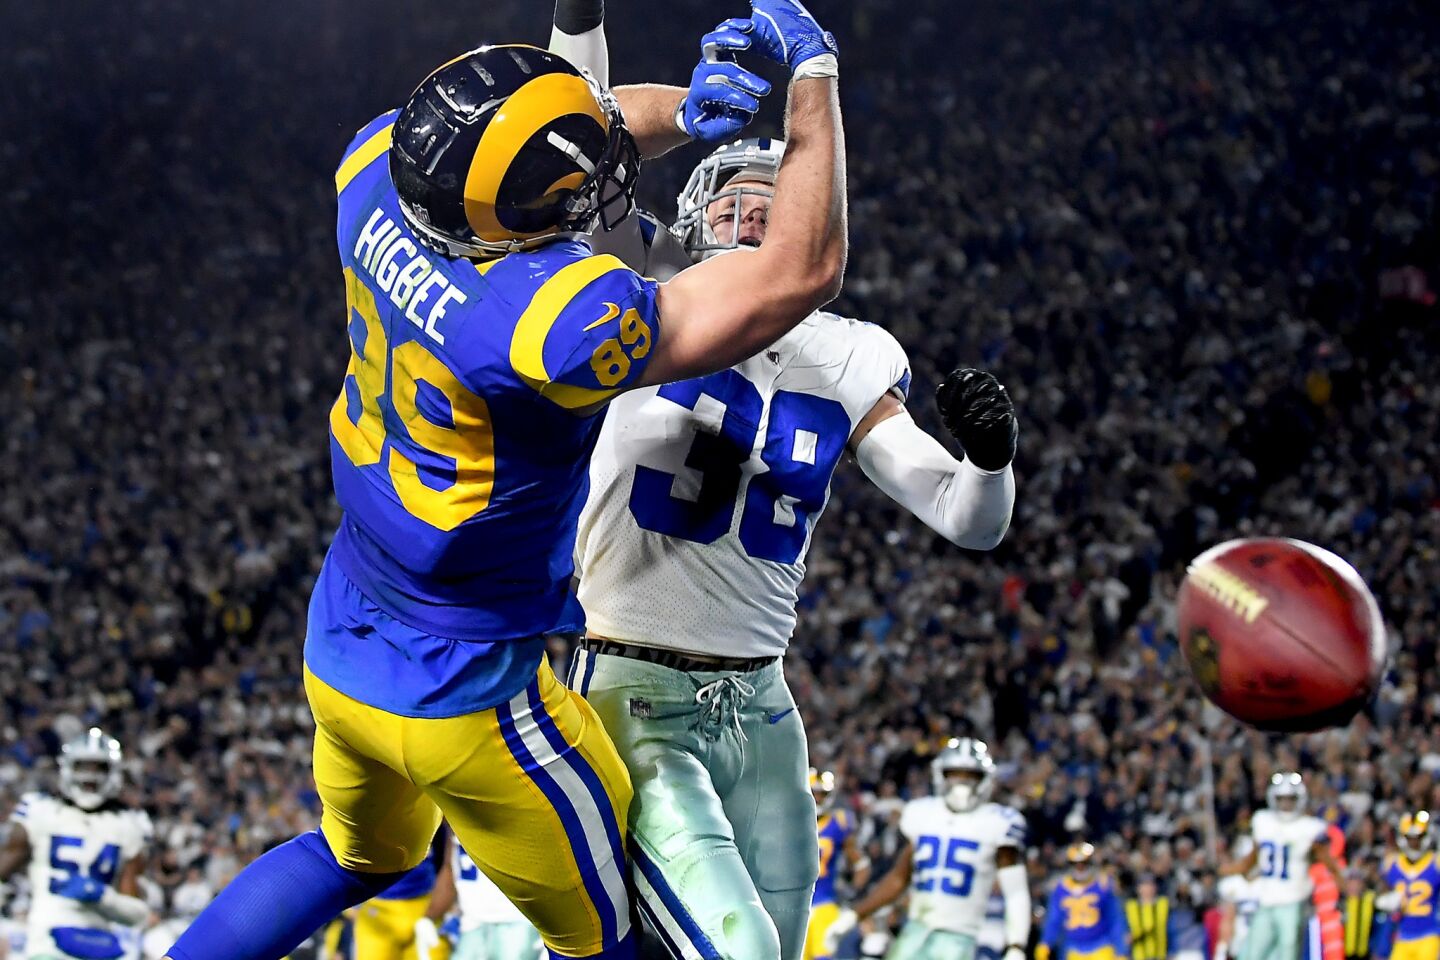 Rams tight end Tyler Higbee can't make the catch in the end zone as he's defended by Cowboys safety Jeff Heath.